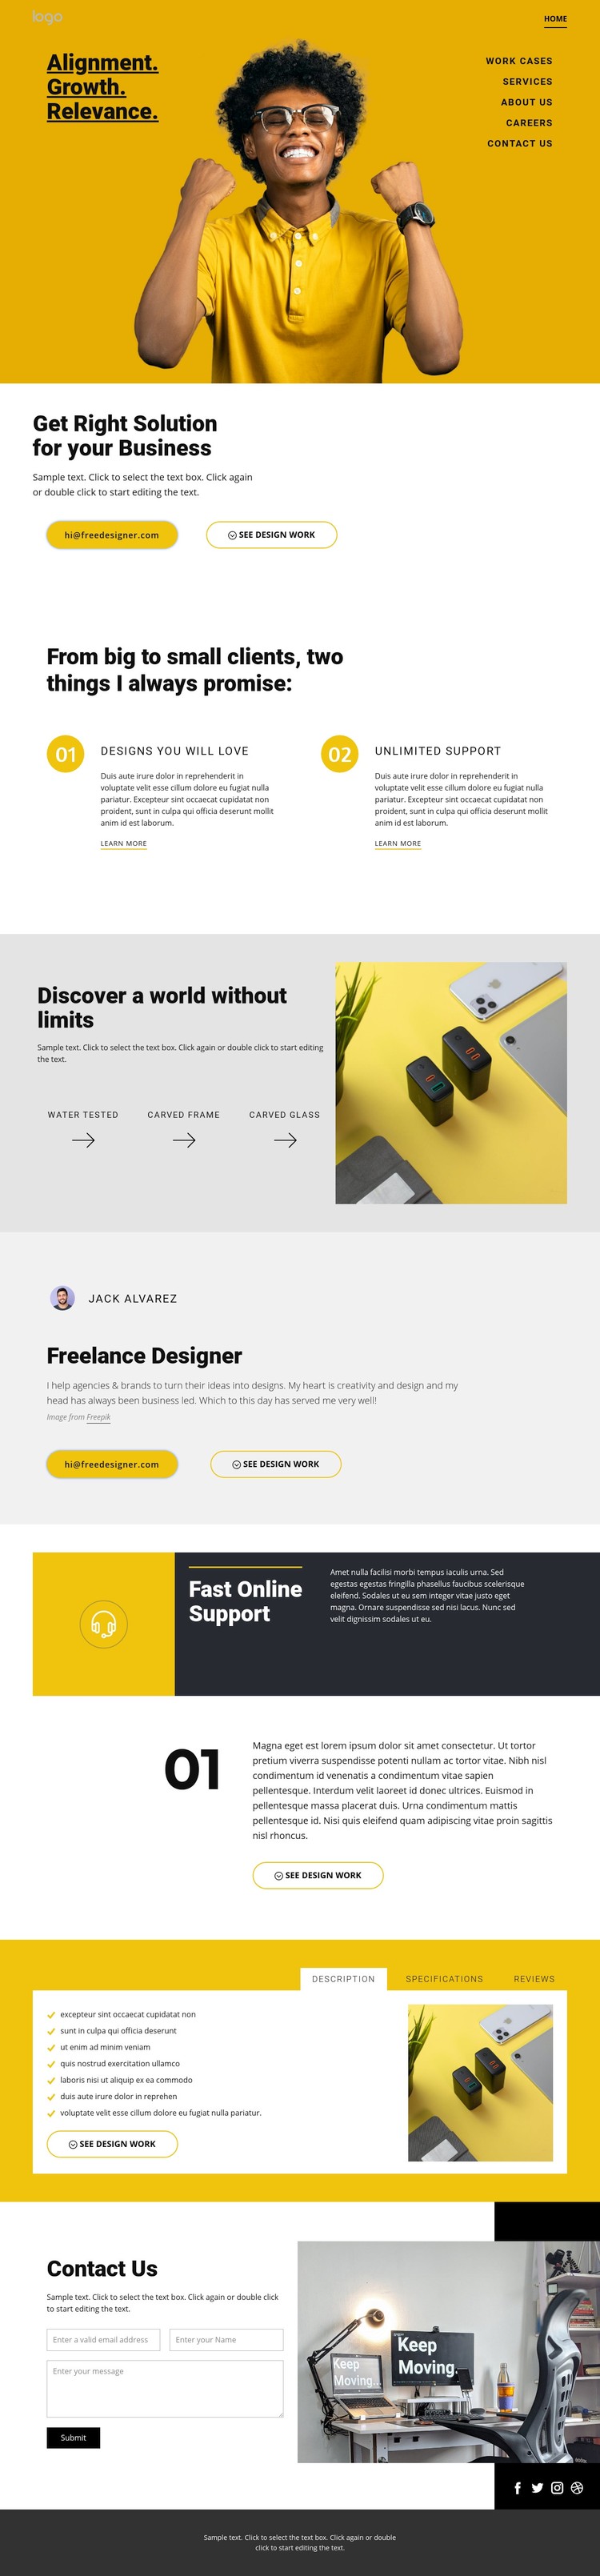 Quality is our goal Webflow Template Alternative